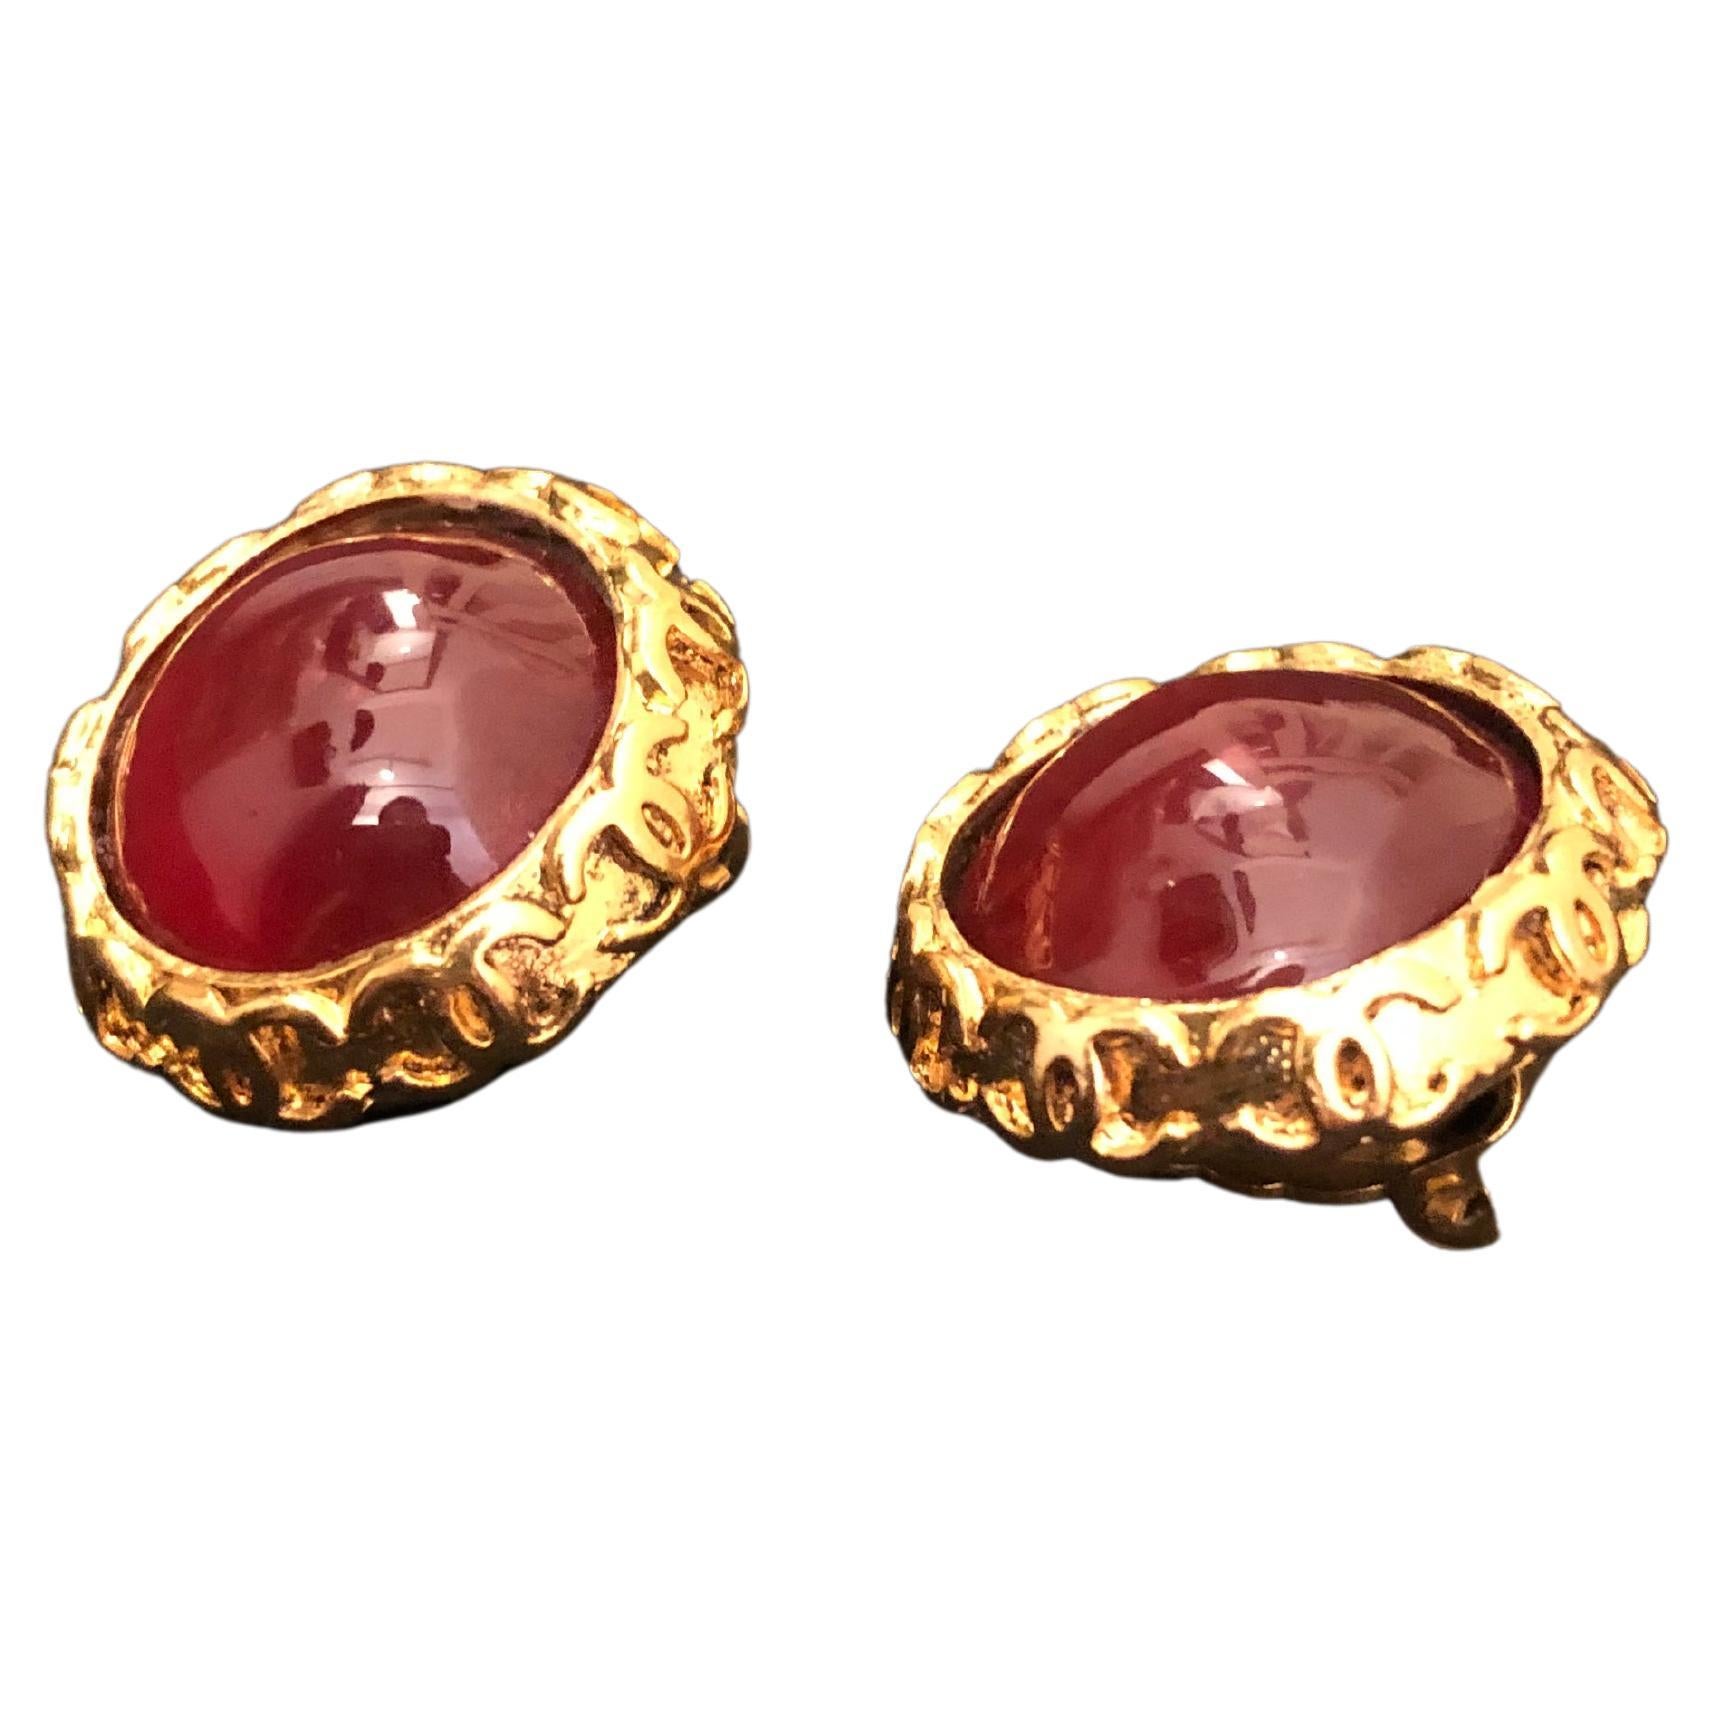 1994 Vintage CHANEL Gold Toned Red Gripoix Earclips Clip On Earrings